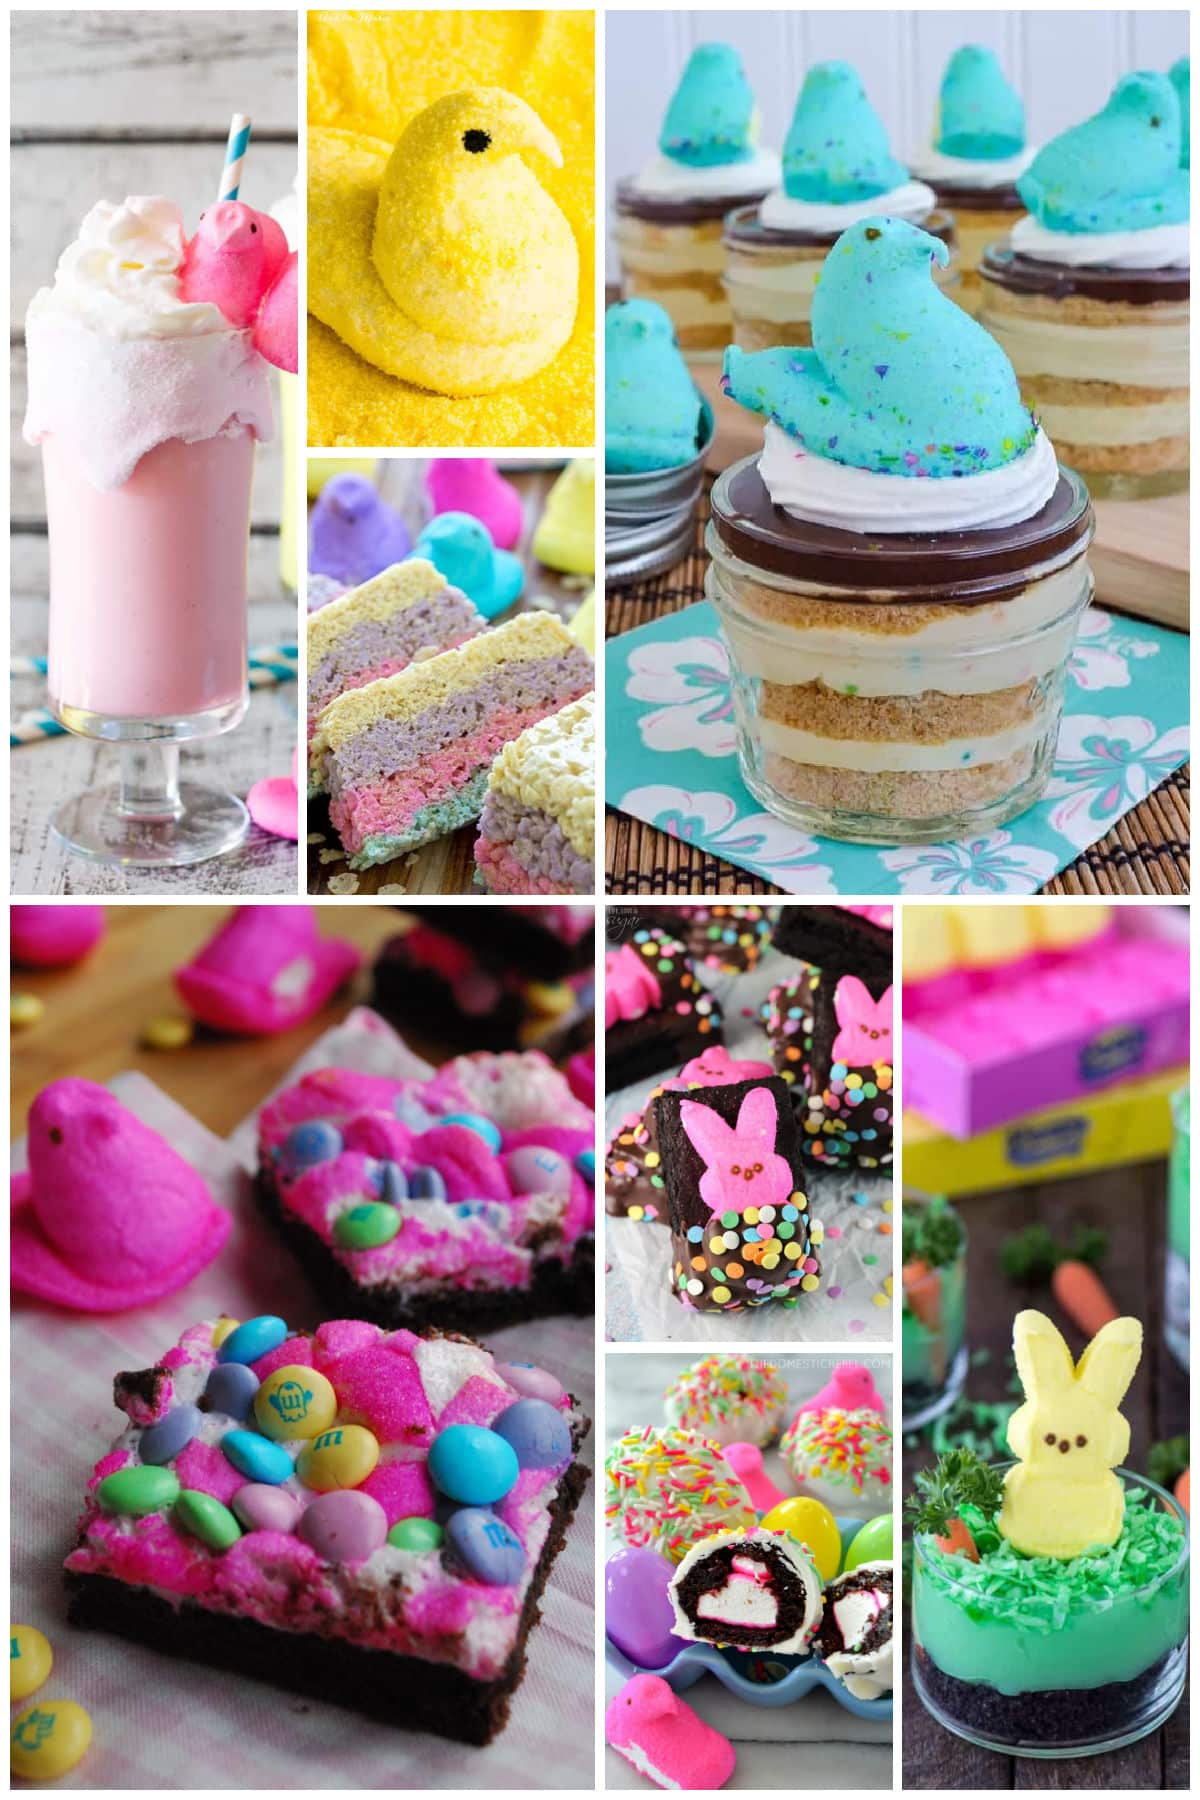 A group of irresistible Easter Peeps recipes like Peeps candy bars, Peeps milkshakes and Peeps bunny pudding cups.